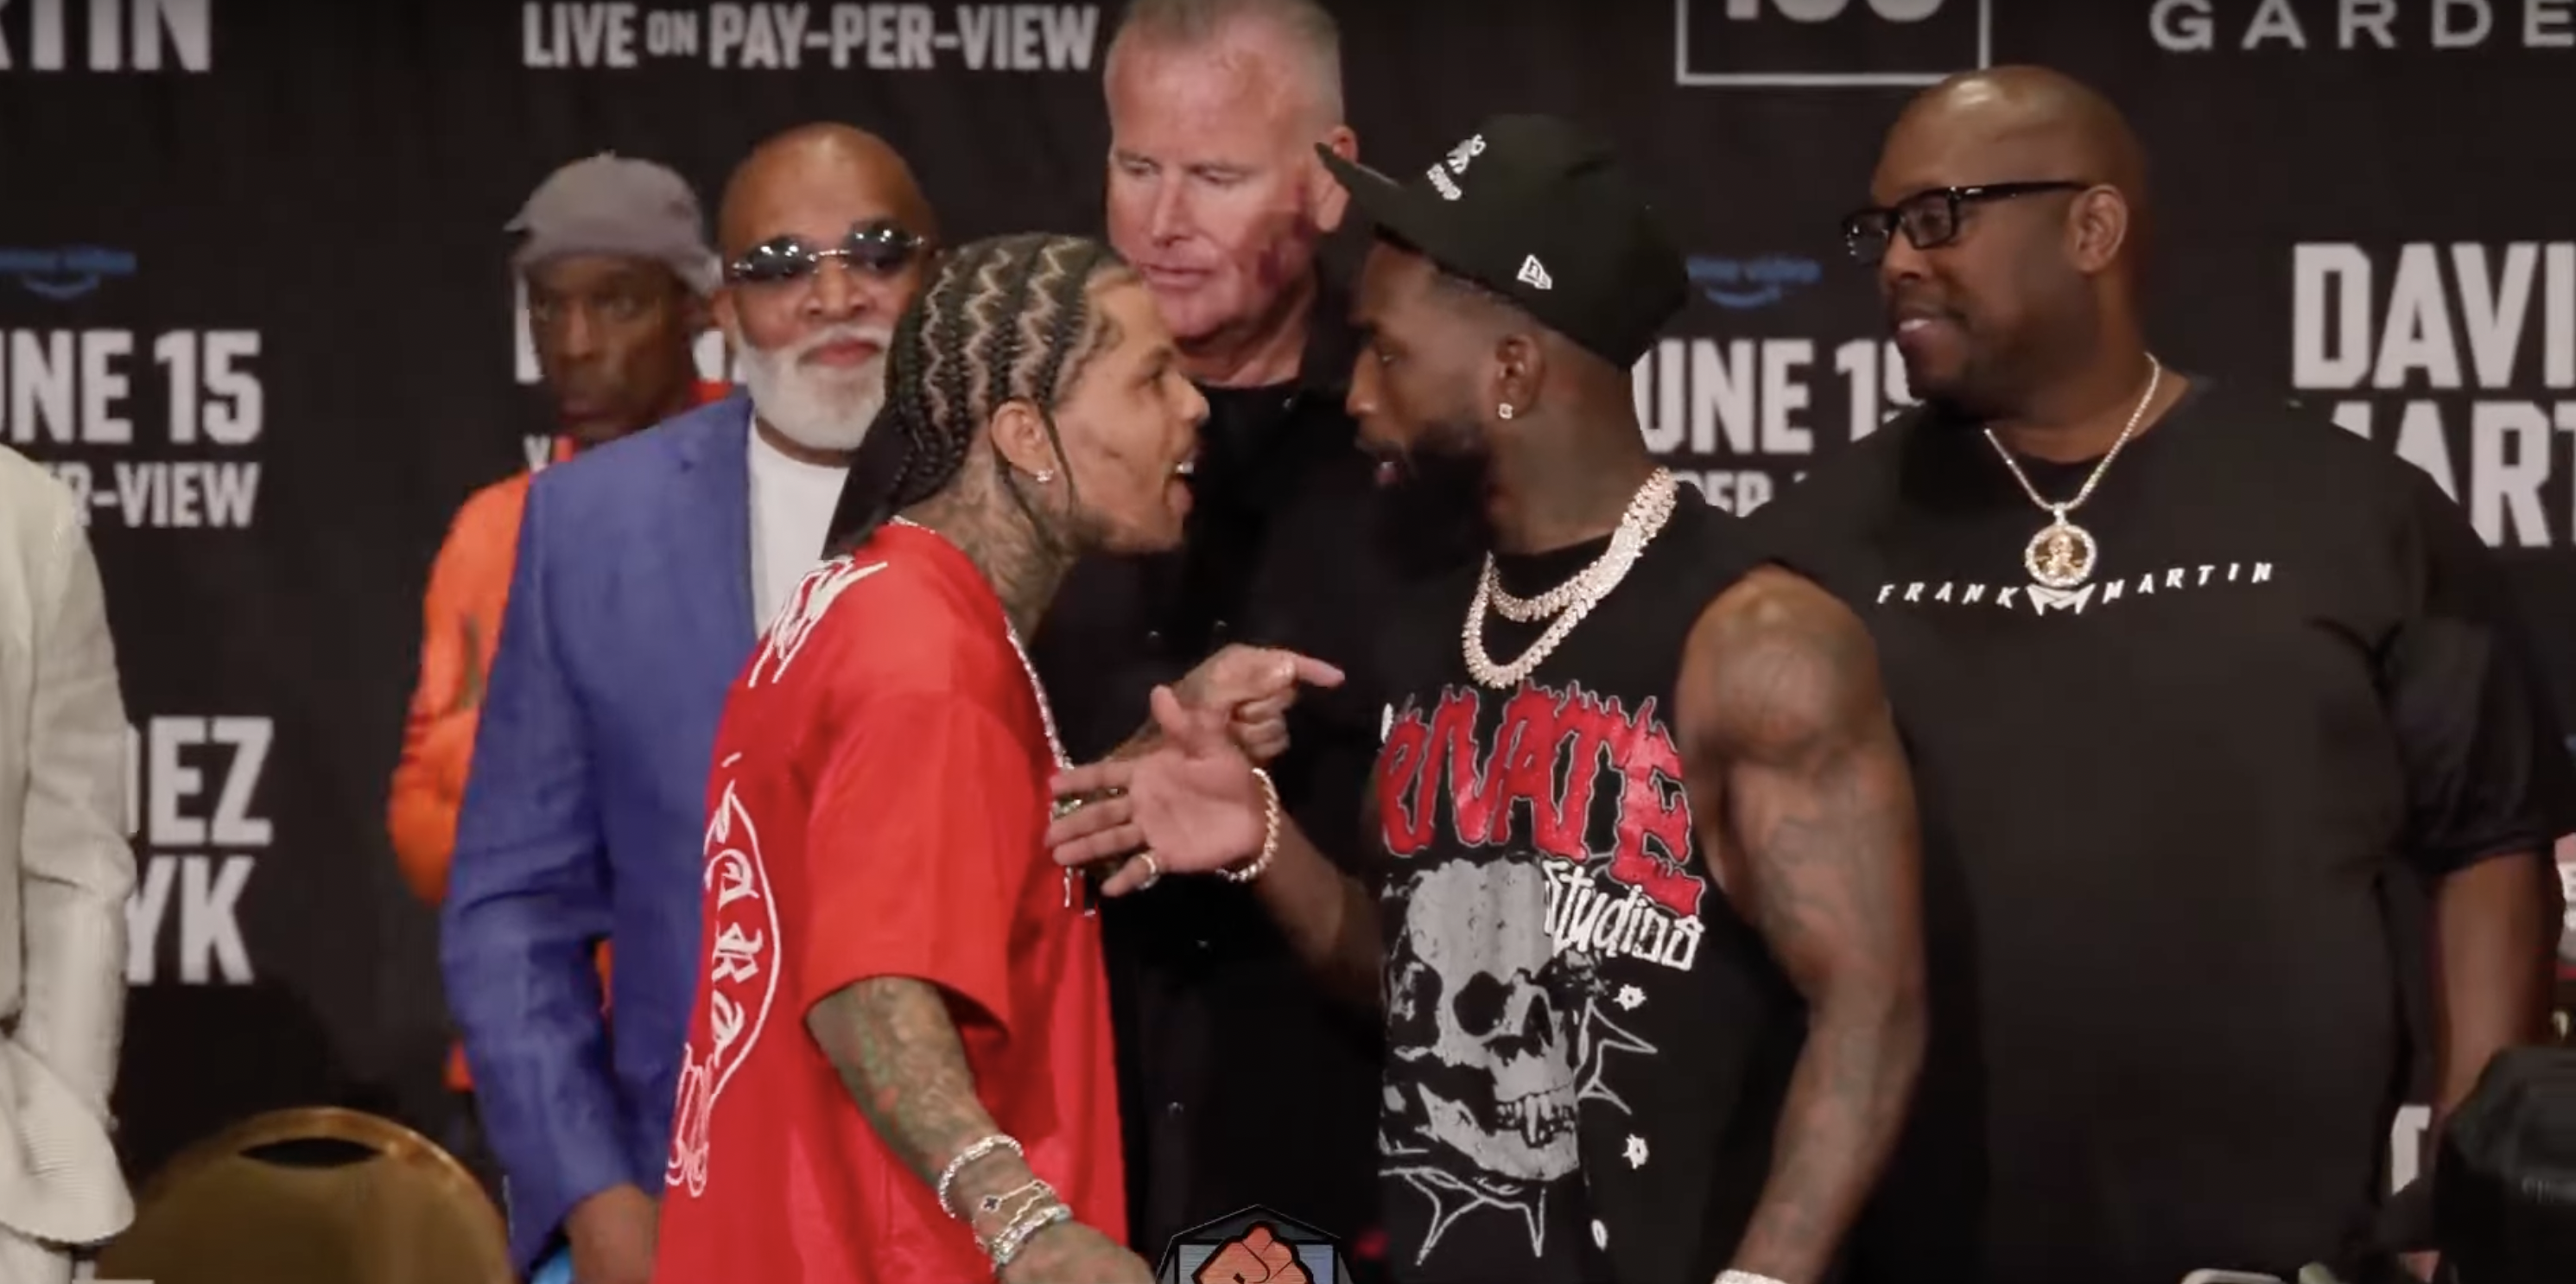 Gervonta Davis expects to show Frank Martin that he’s on a completely different level.